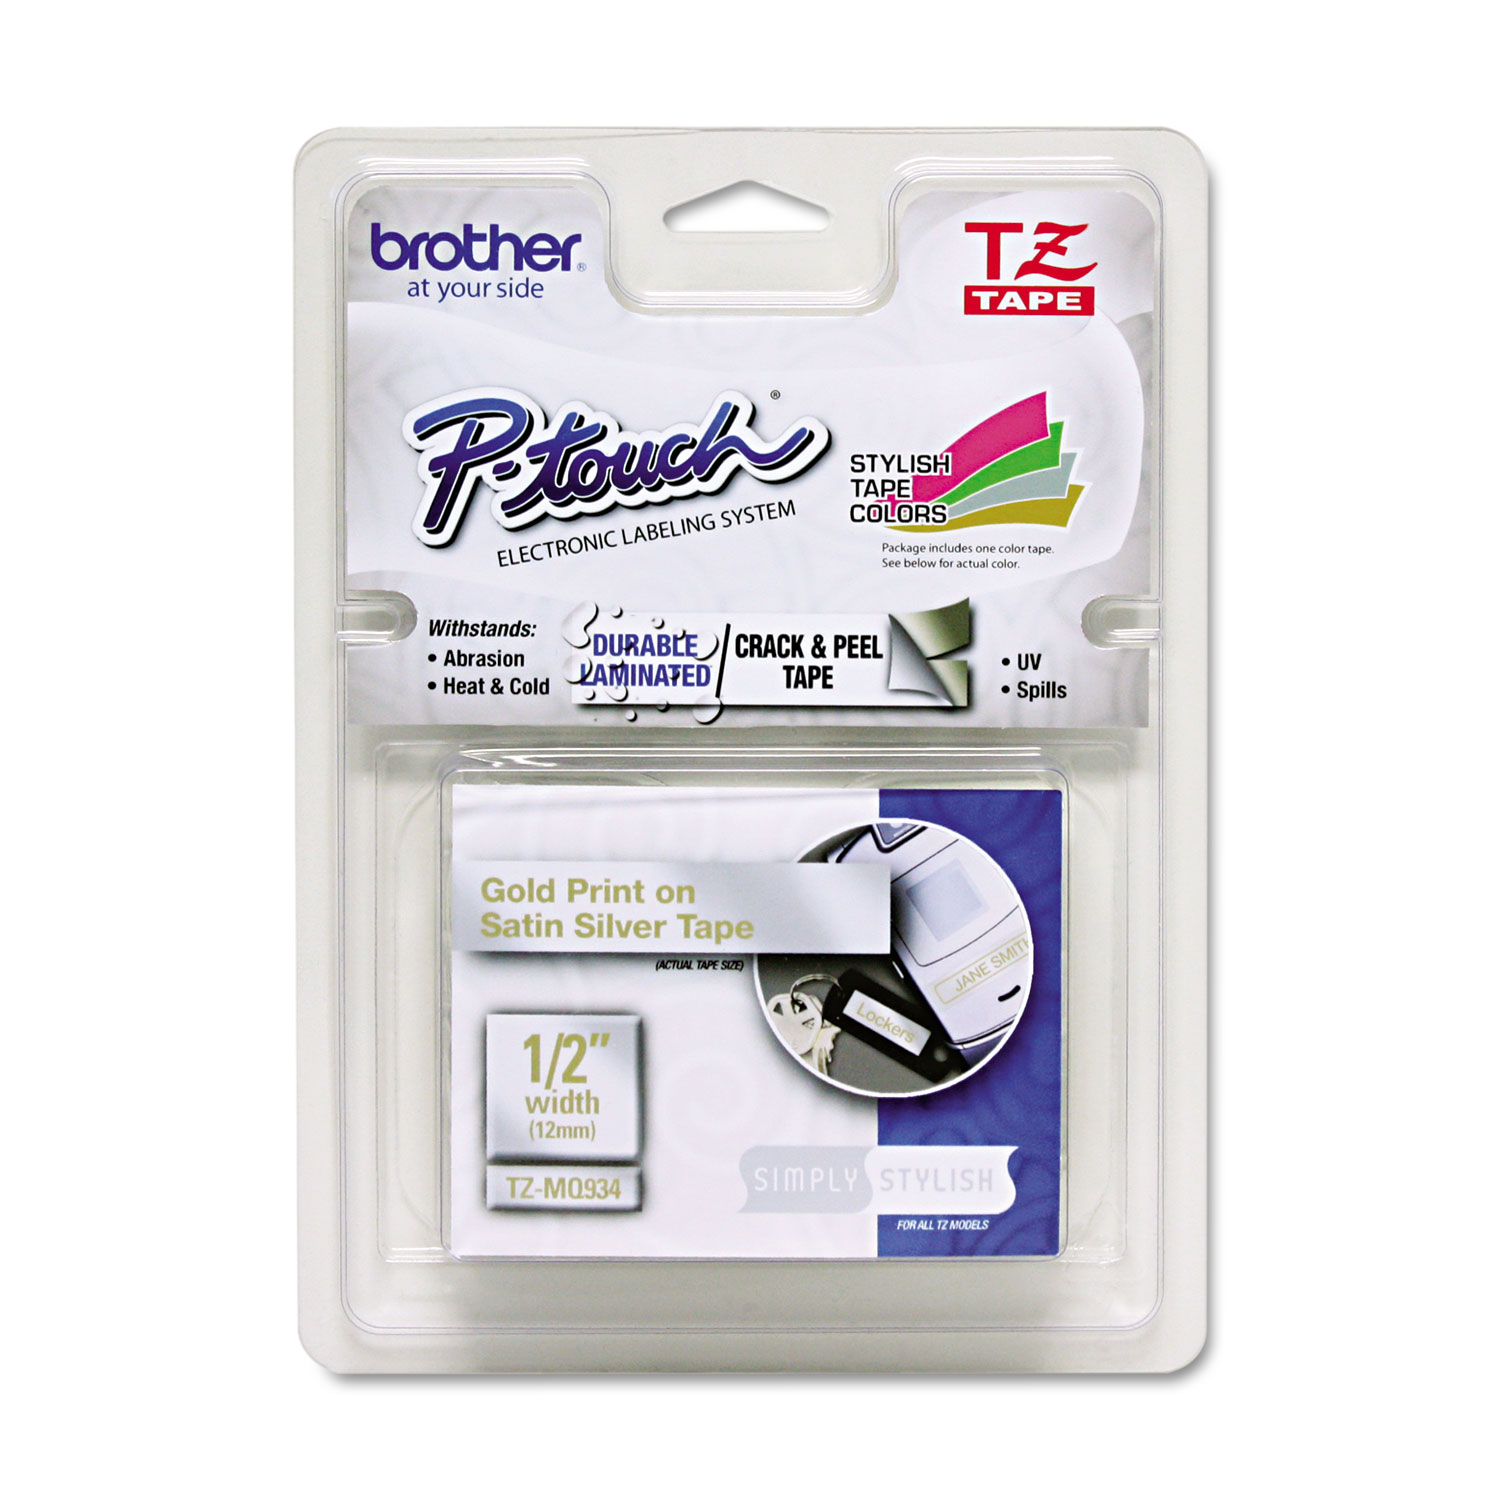  Brother P-Touch TZEMQ934 TZ Standard Adhesive Laminated Labeling Tape, 0.47 x 16.4 ft, Gold/Silver (BRTTZEMQ934) 